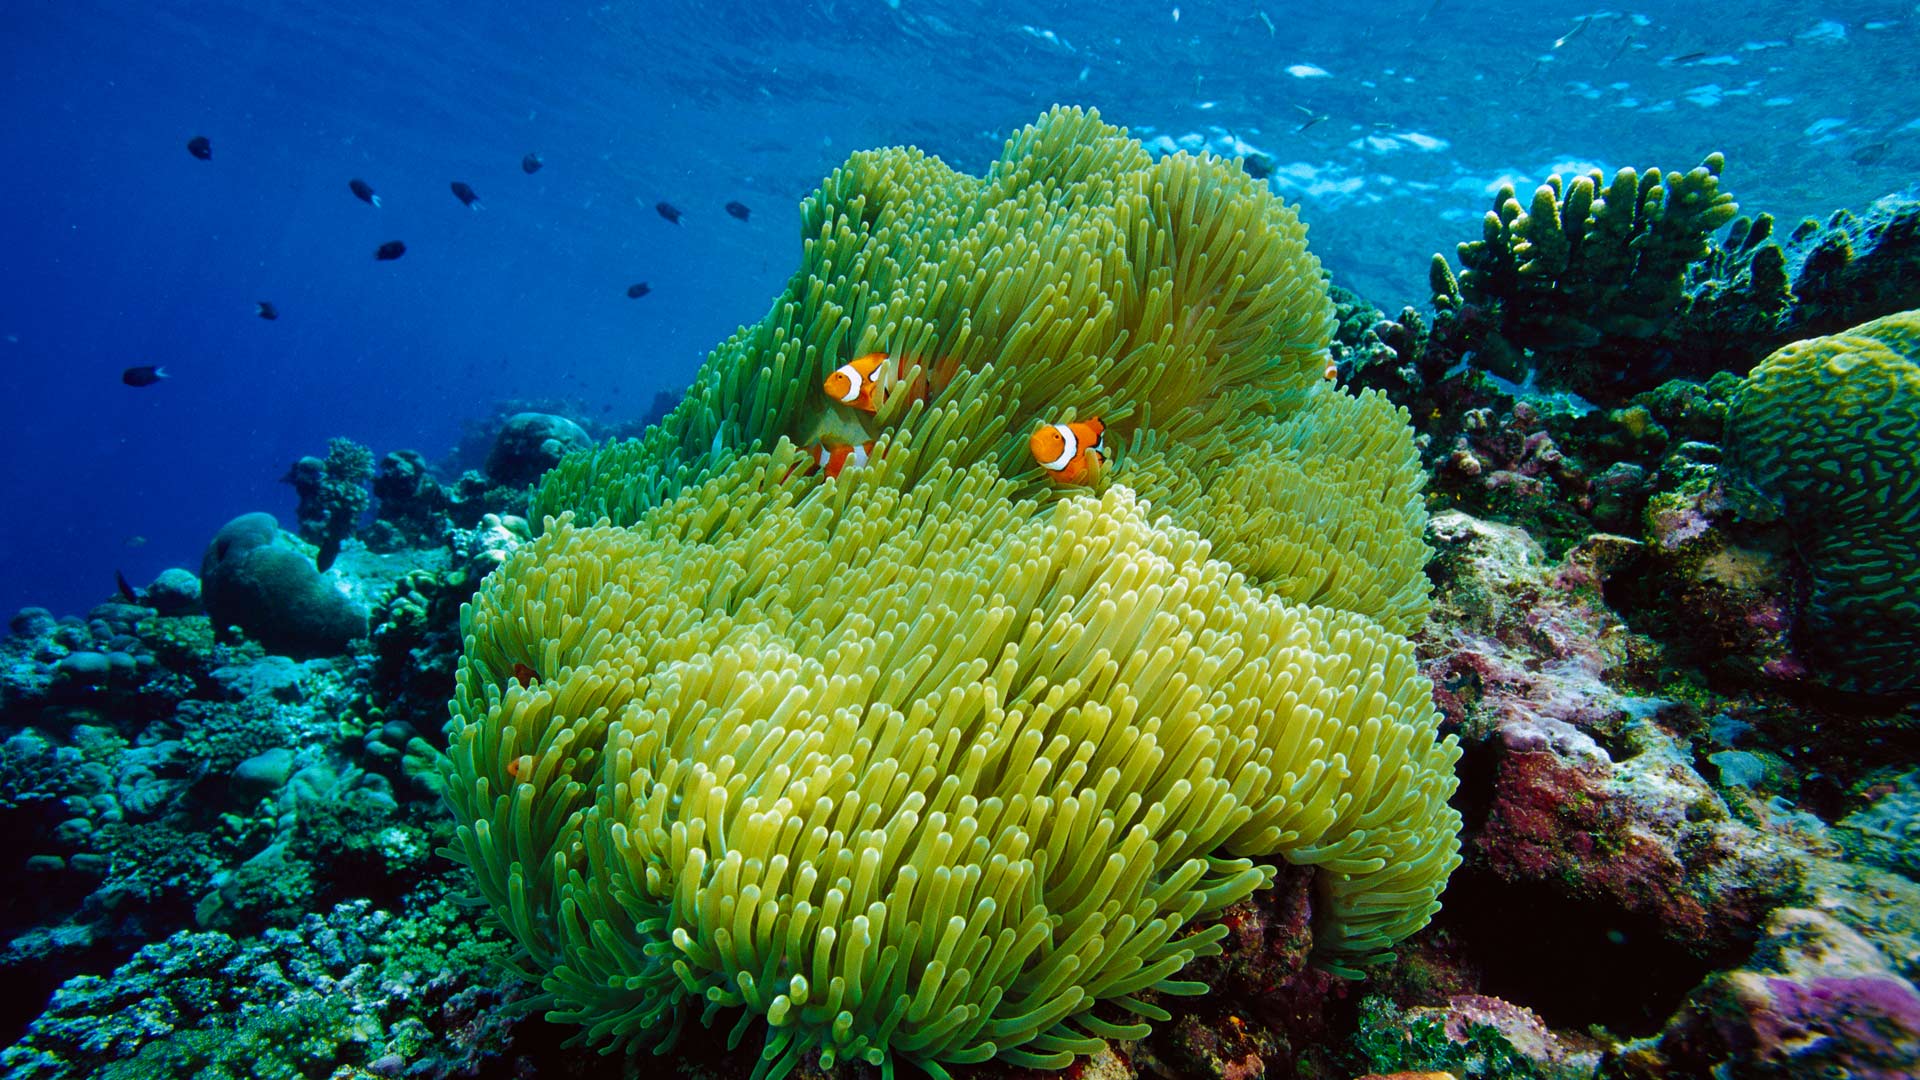 Sea Anemone and Clownfish. Magnificent sea anemone with black